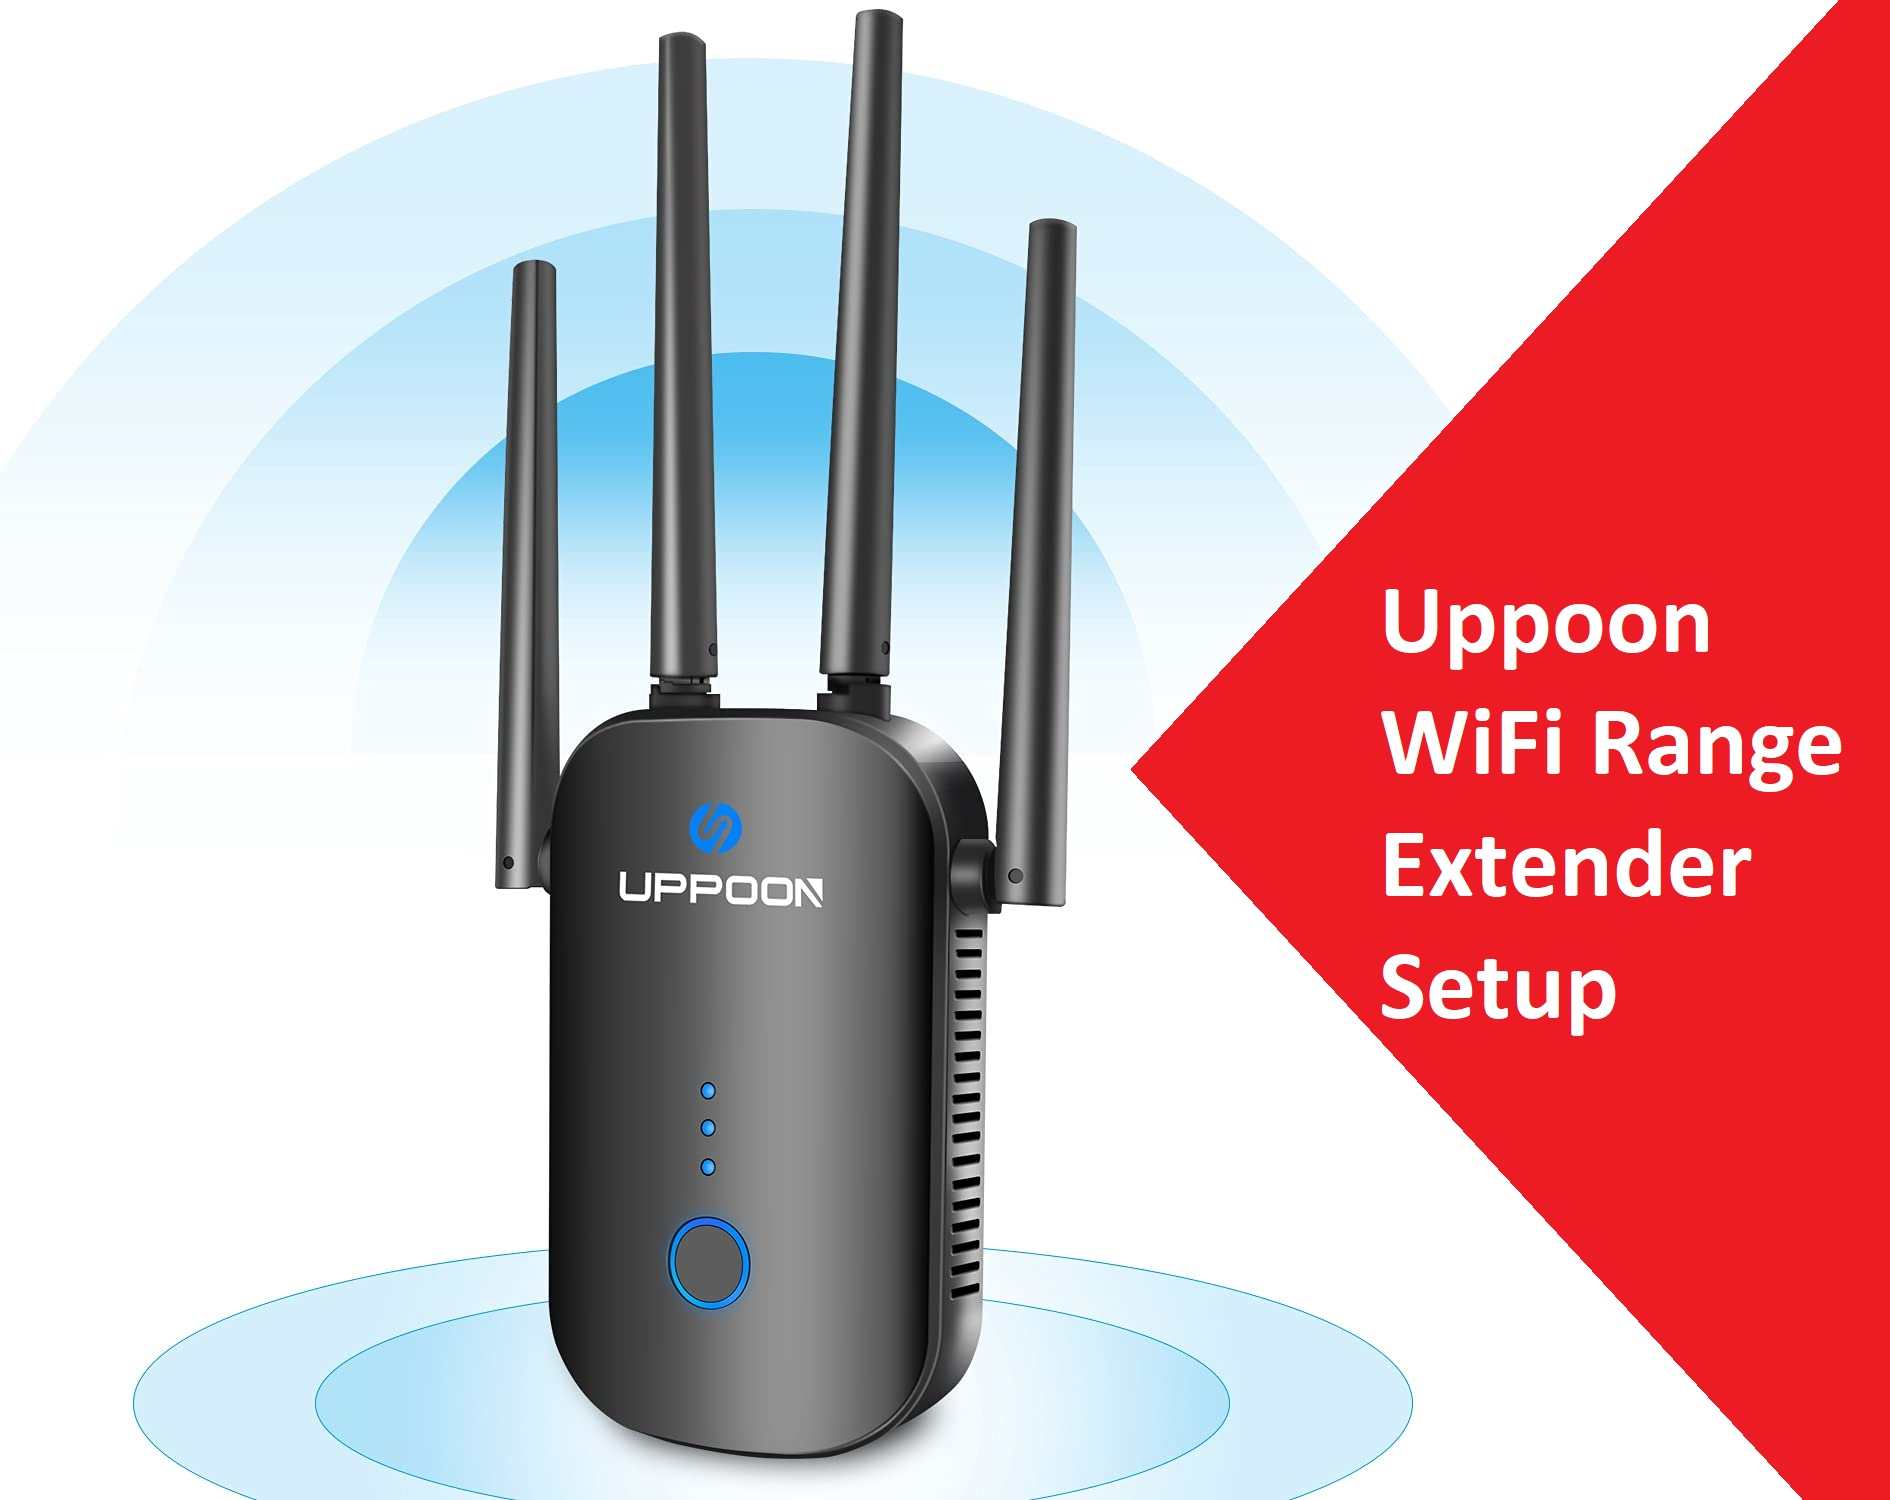 How to set up the UPPOON WiFi range extender